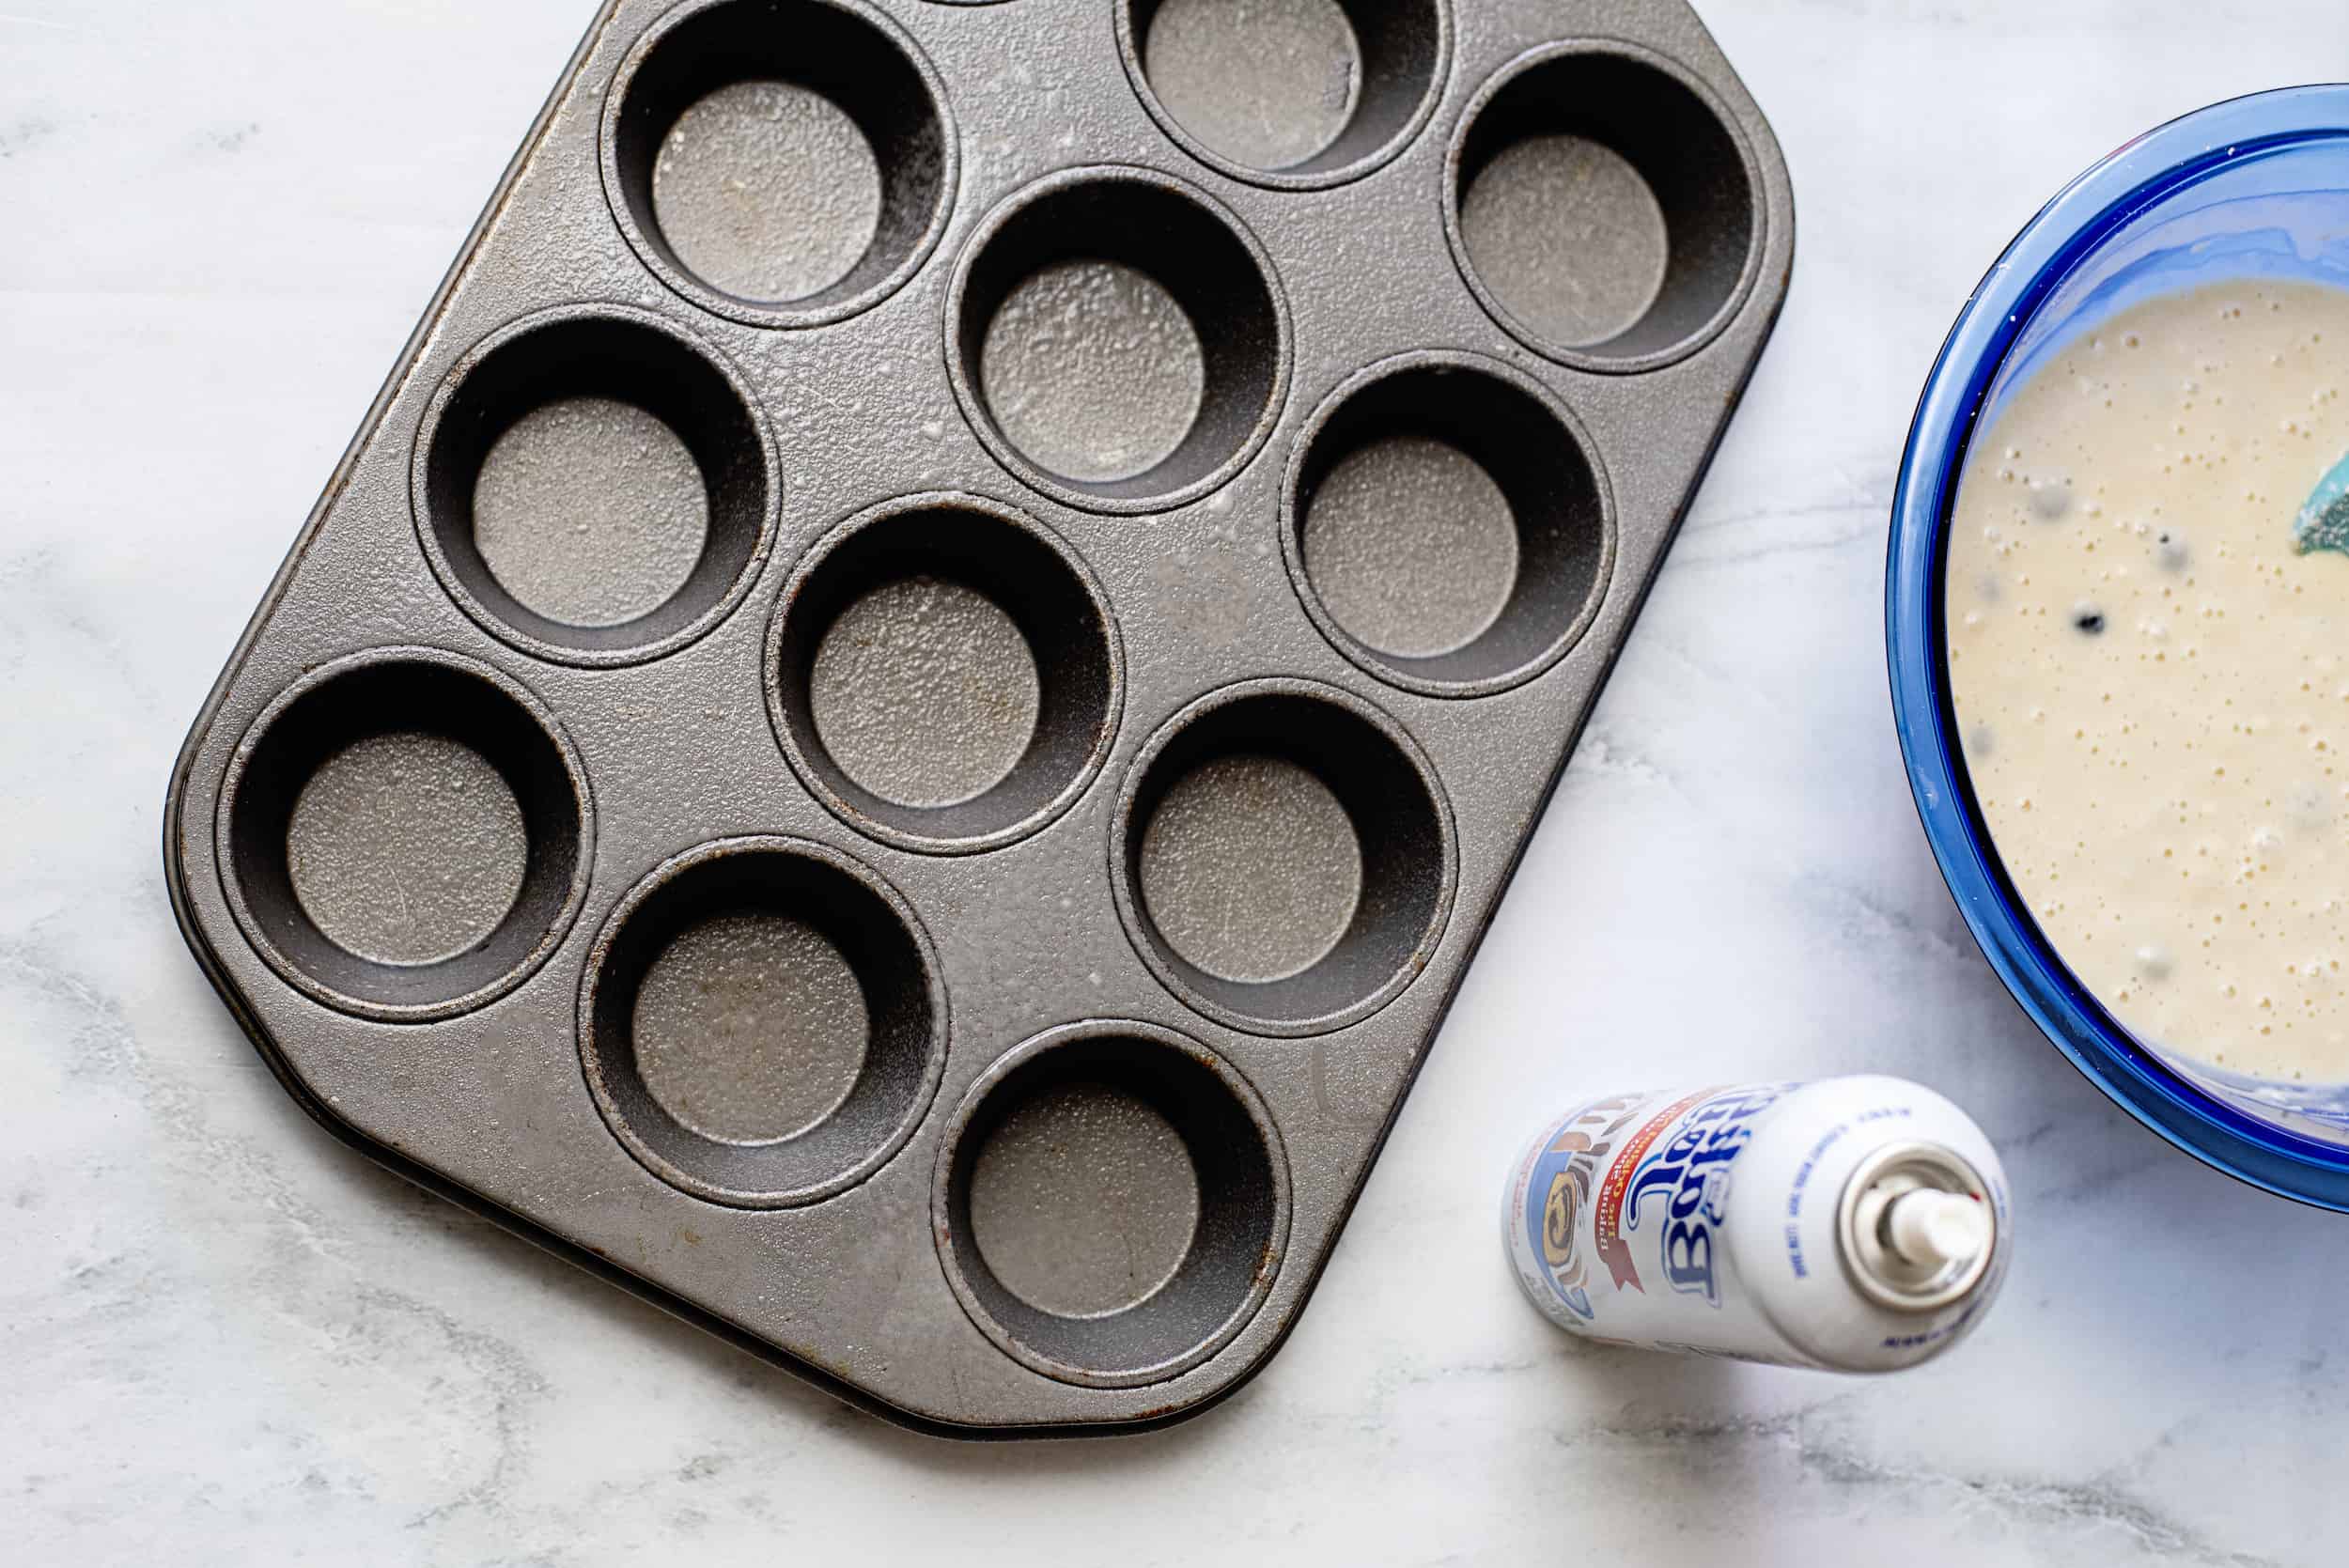 Spray muffin pan with cooking spray.